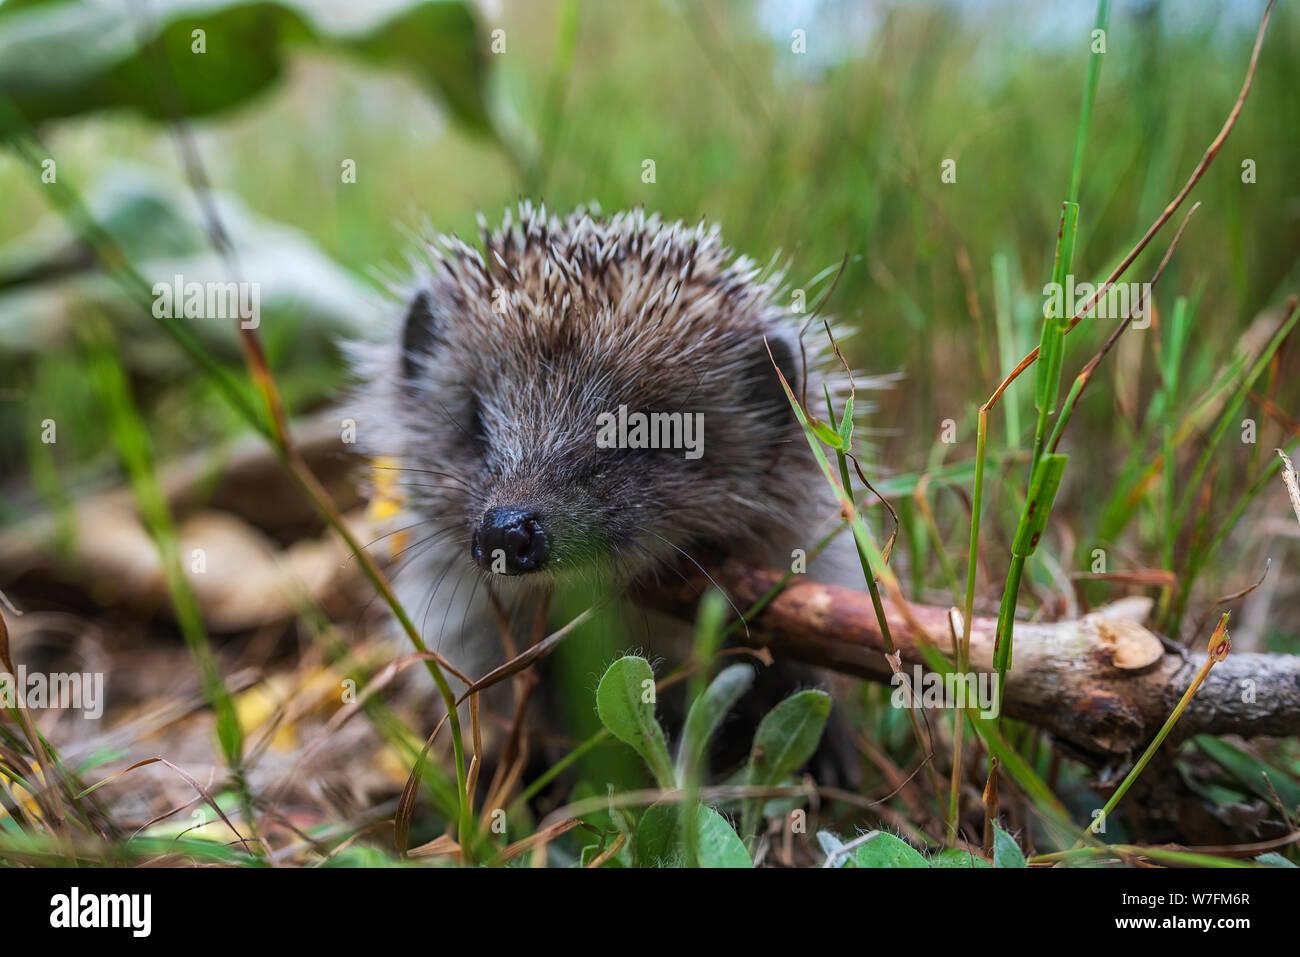 european-hedgehog-erinaceus-europaeus-on-a-green-moss-in-the-forest-summer-image-cute-funny-animal-with-snipes-W7FM6R.jpg